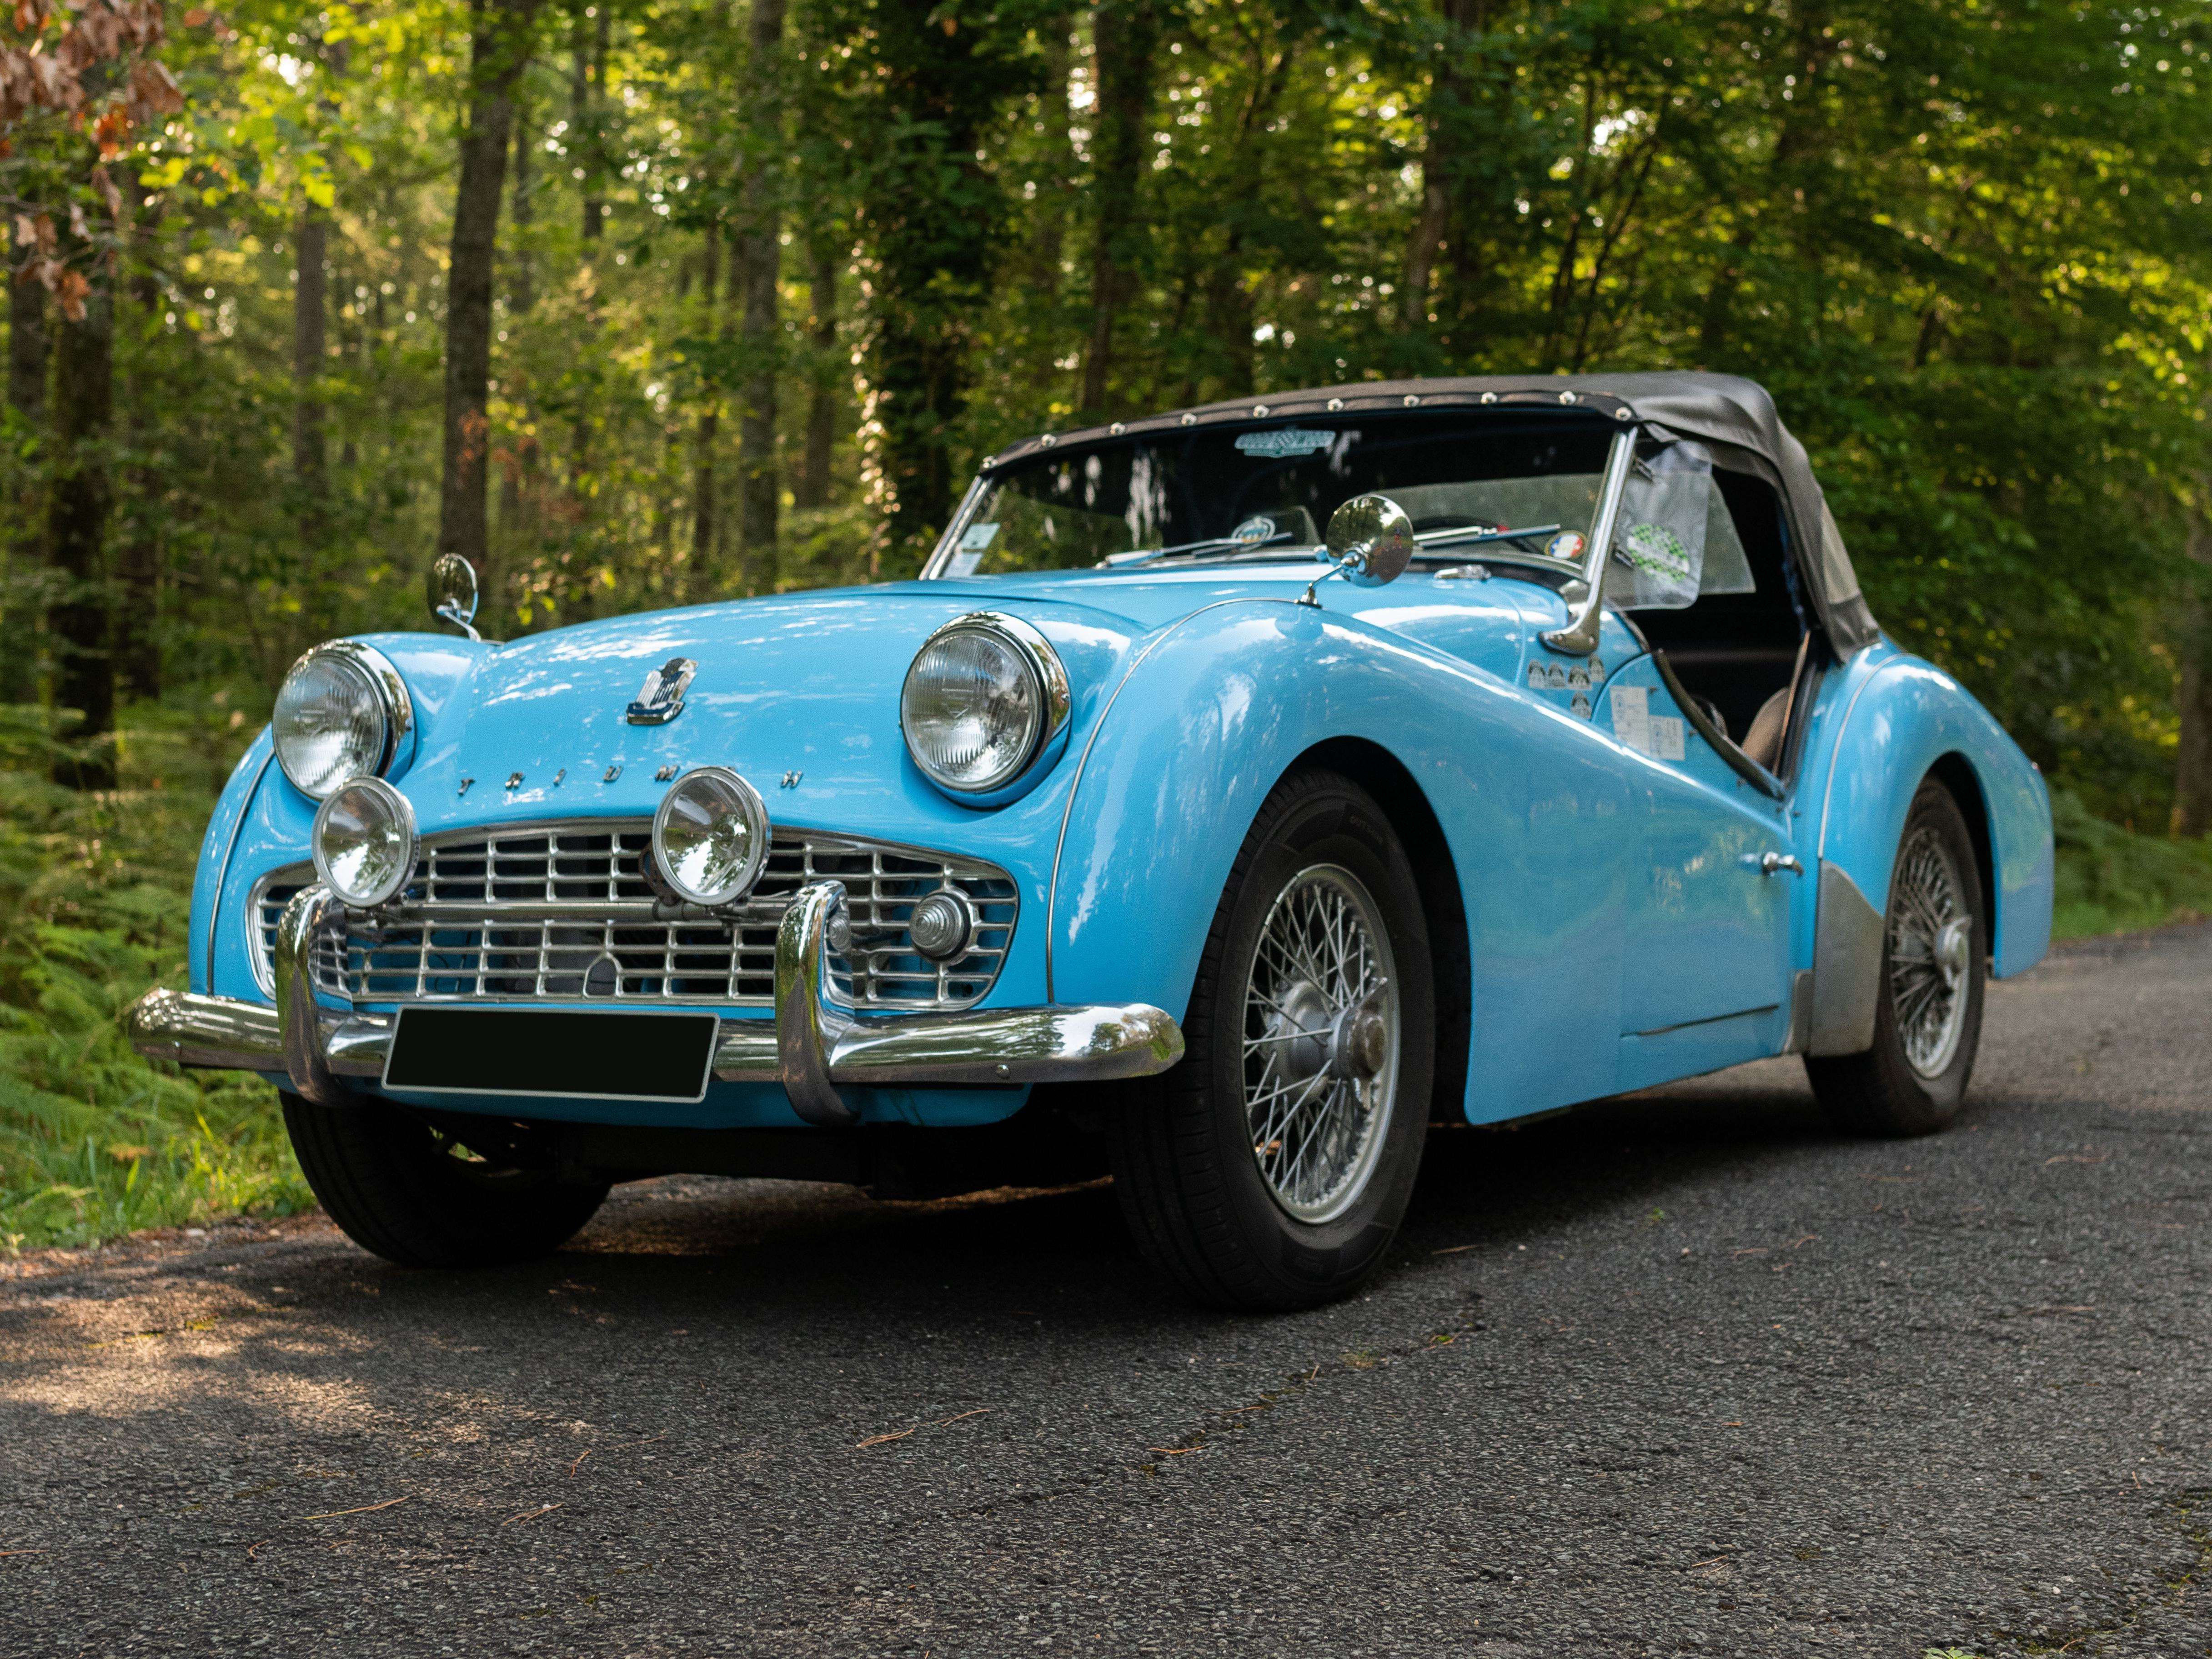 Triumph TR3 Convertible in Blue used in Aix-en-Provence for € 33,000.-